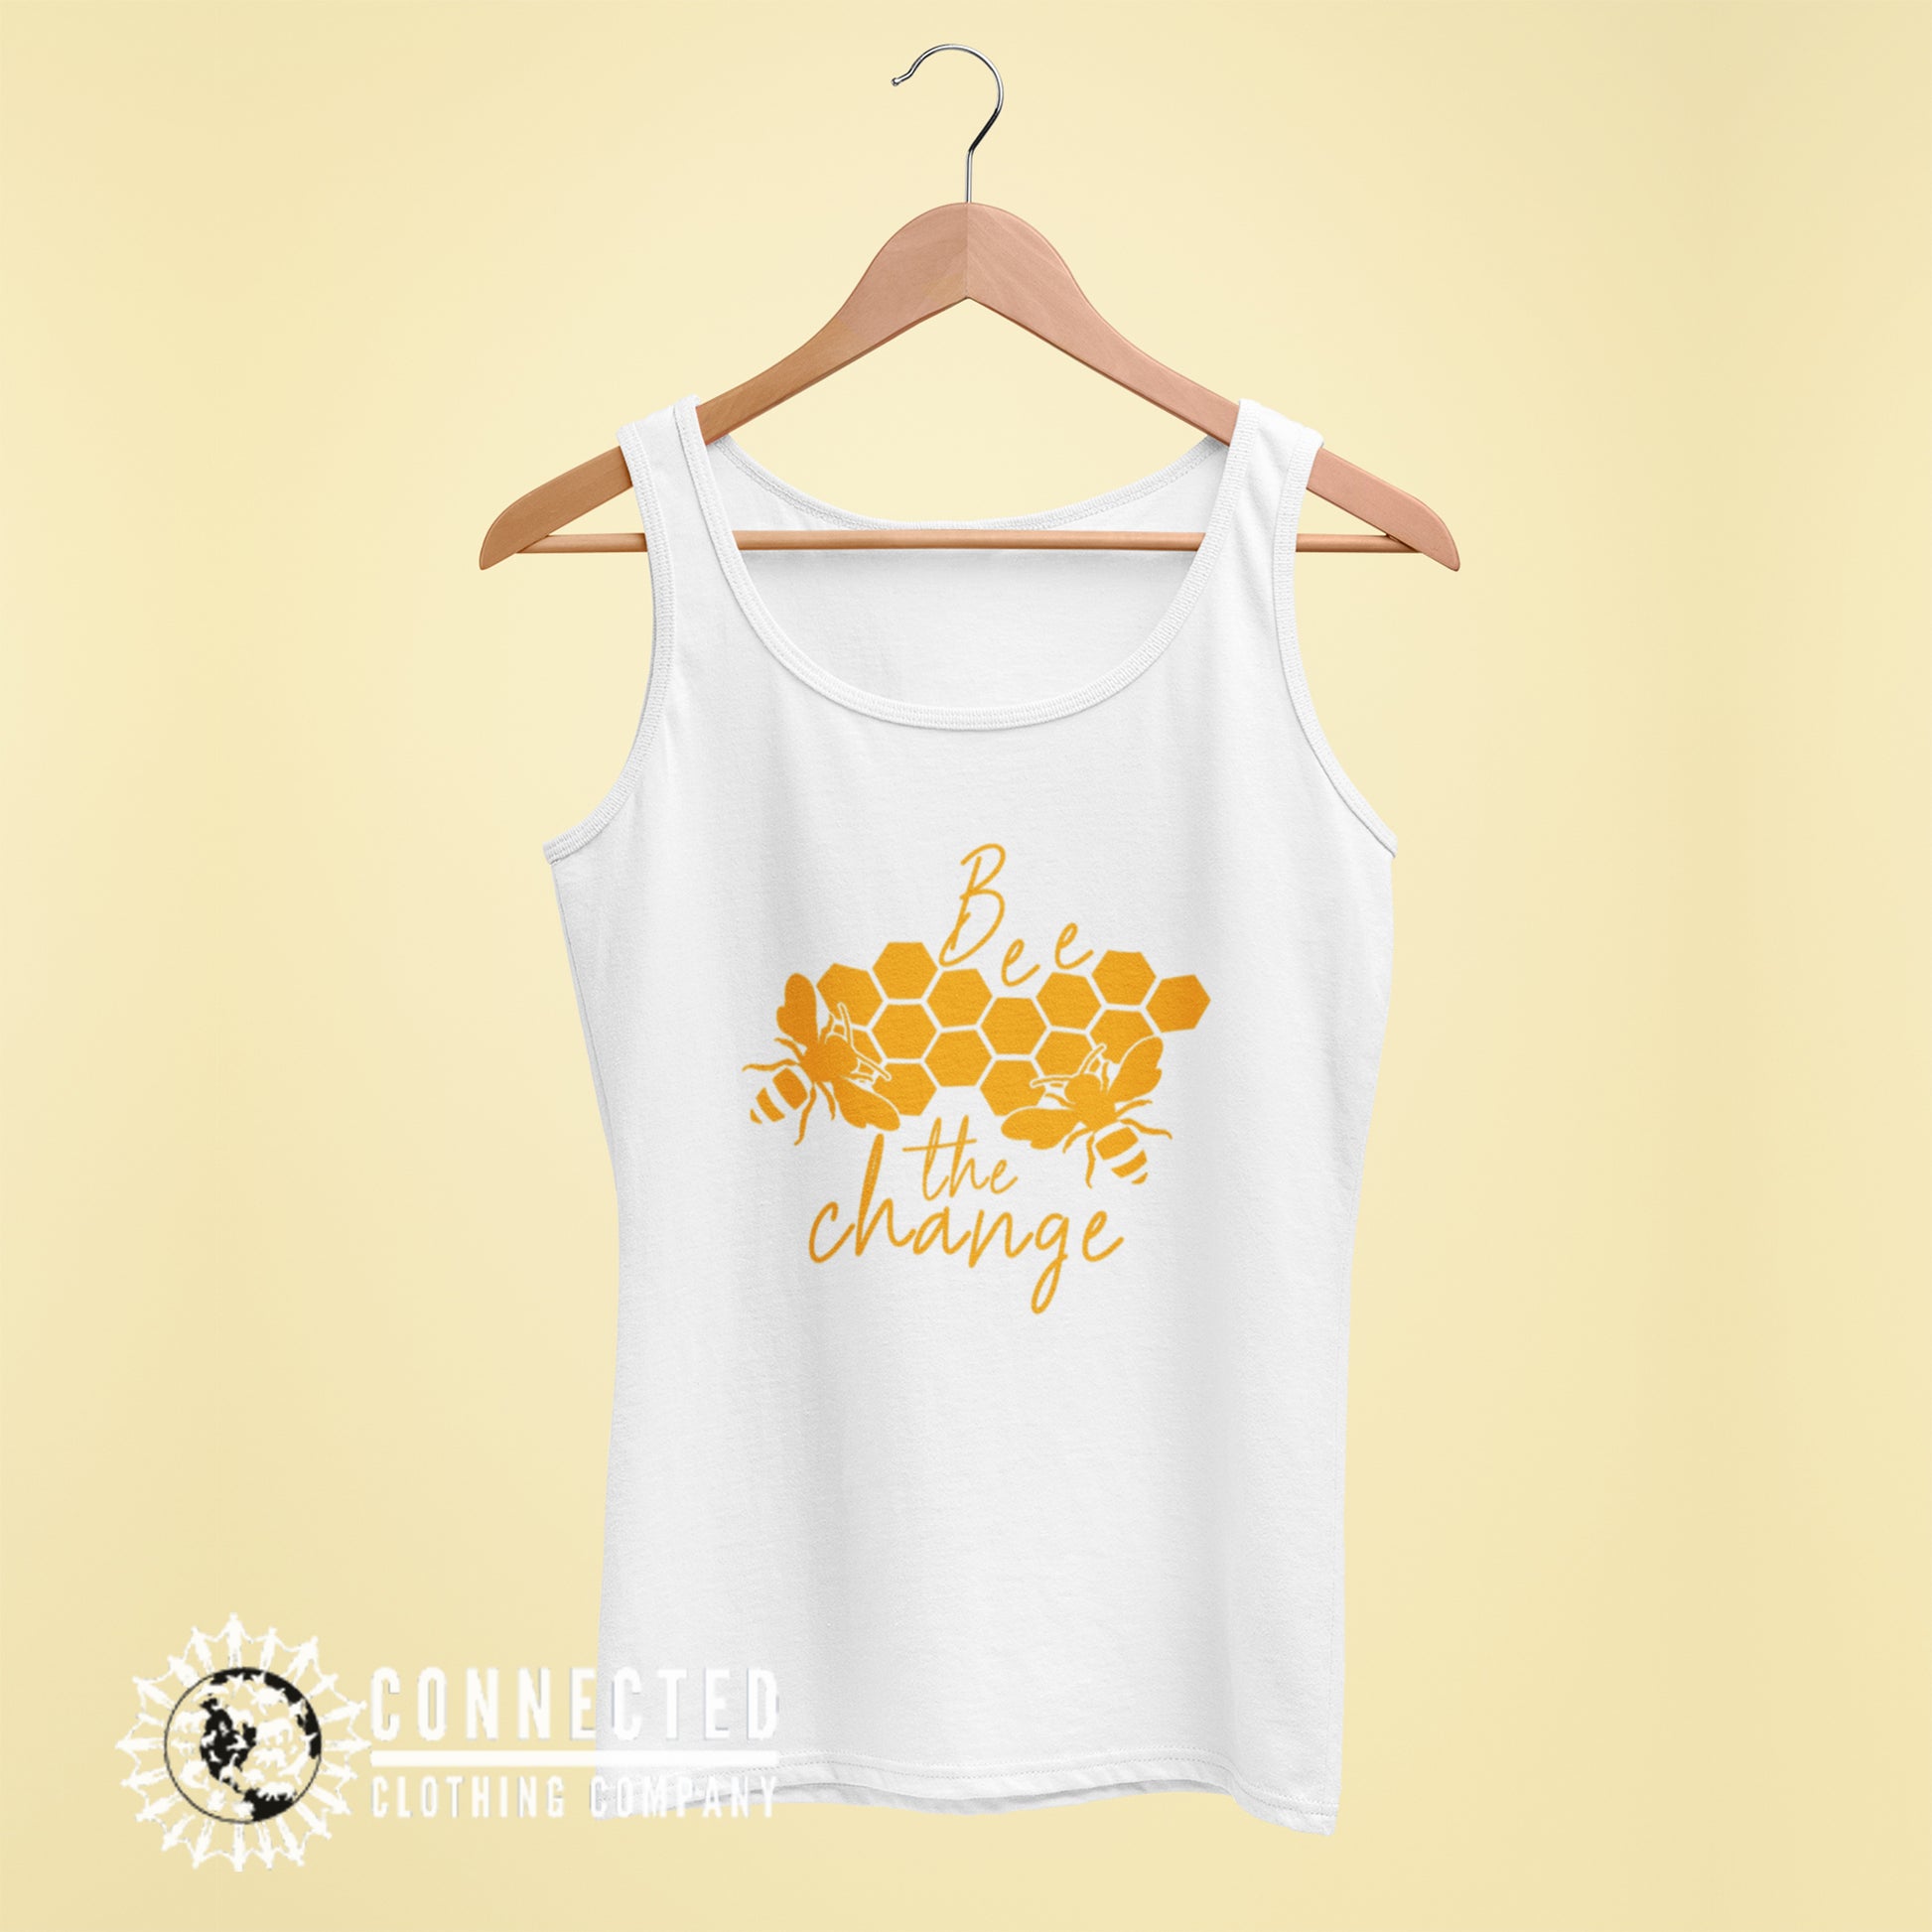 White Bee The Change Women's Tank - Connected Clothing Company - 10% of profits donated to the Honeybee Conservancy